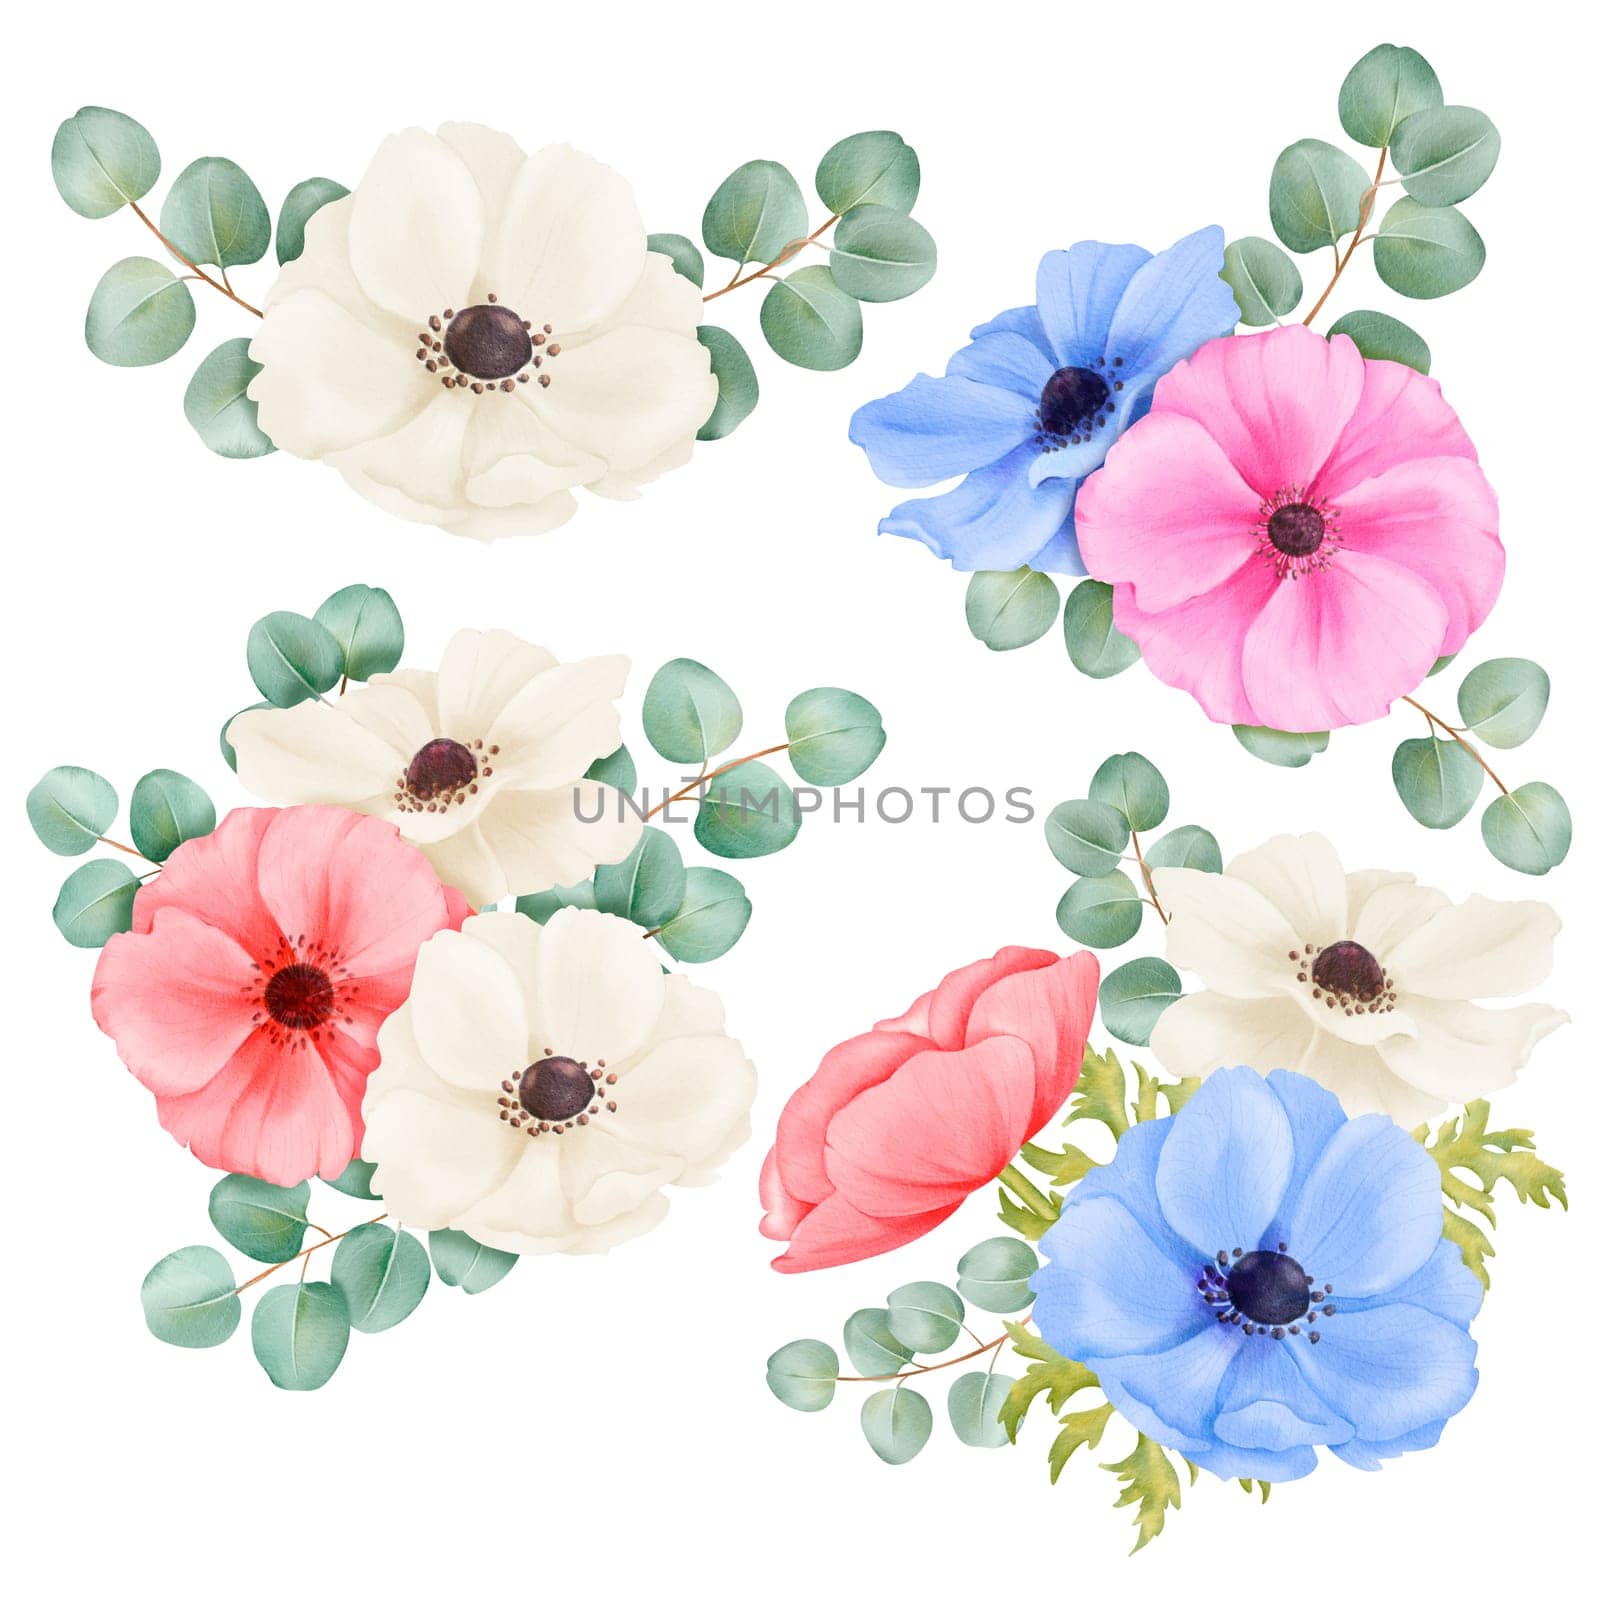 Watercolor set of floral bouquets featuring anemones in various colors and eucalyptus sprigs. Ideal for wedding invitations, greeting cards, stationery, and floral-themed designs by Art_Mari_Ka